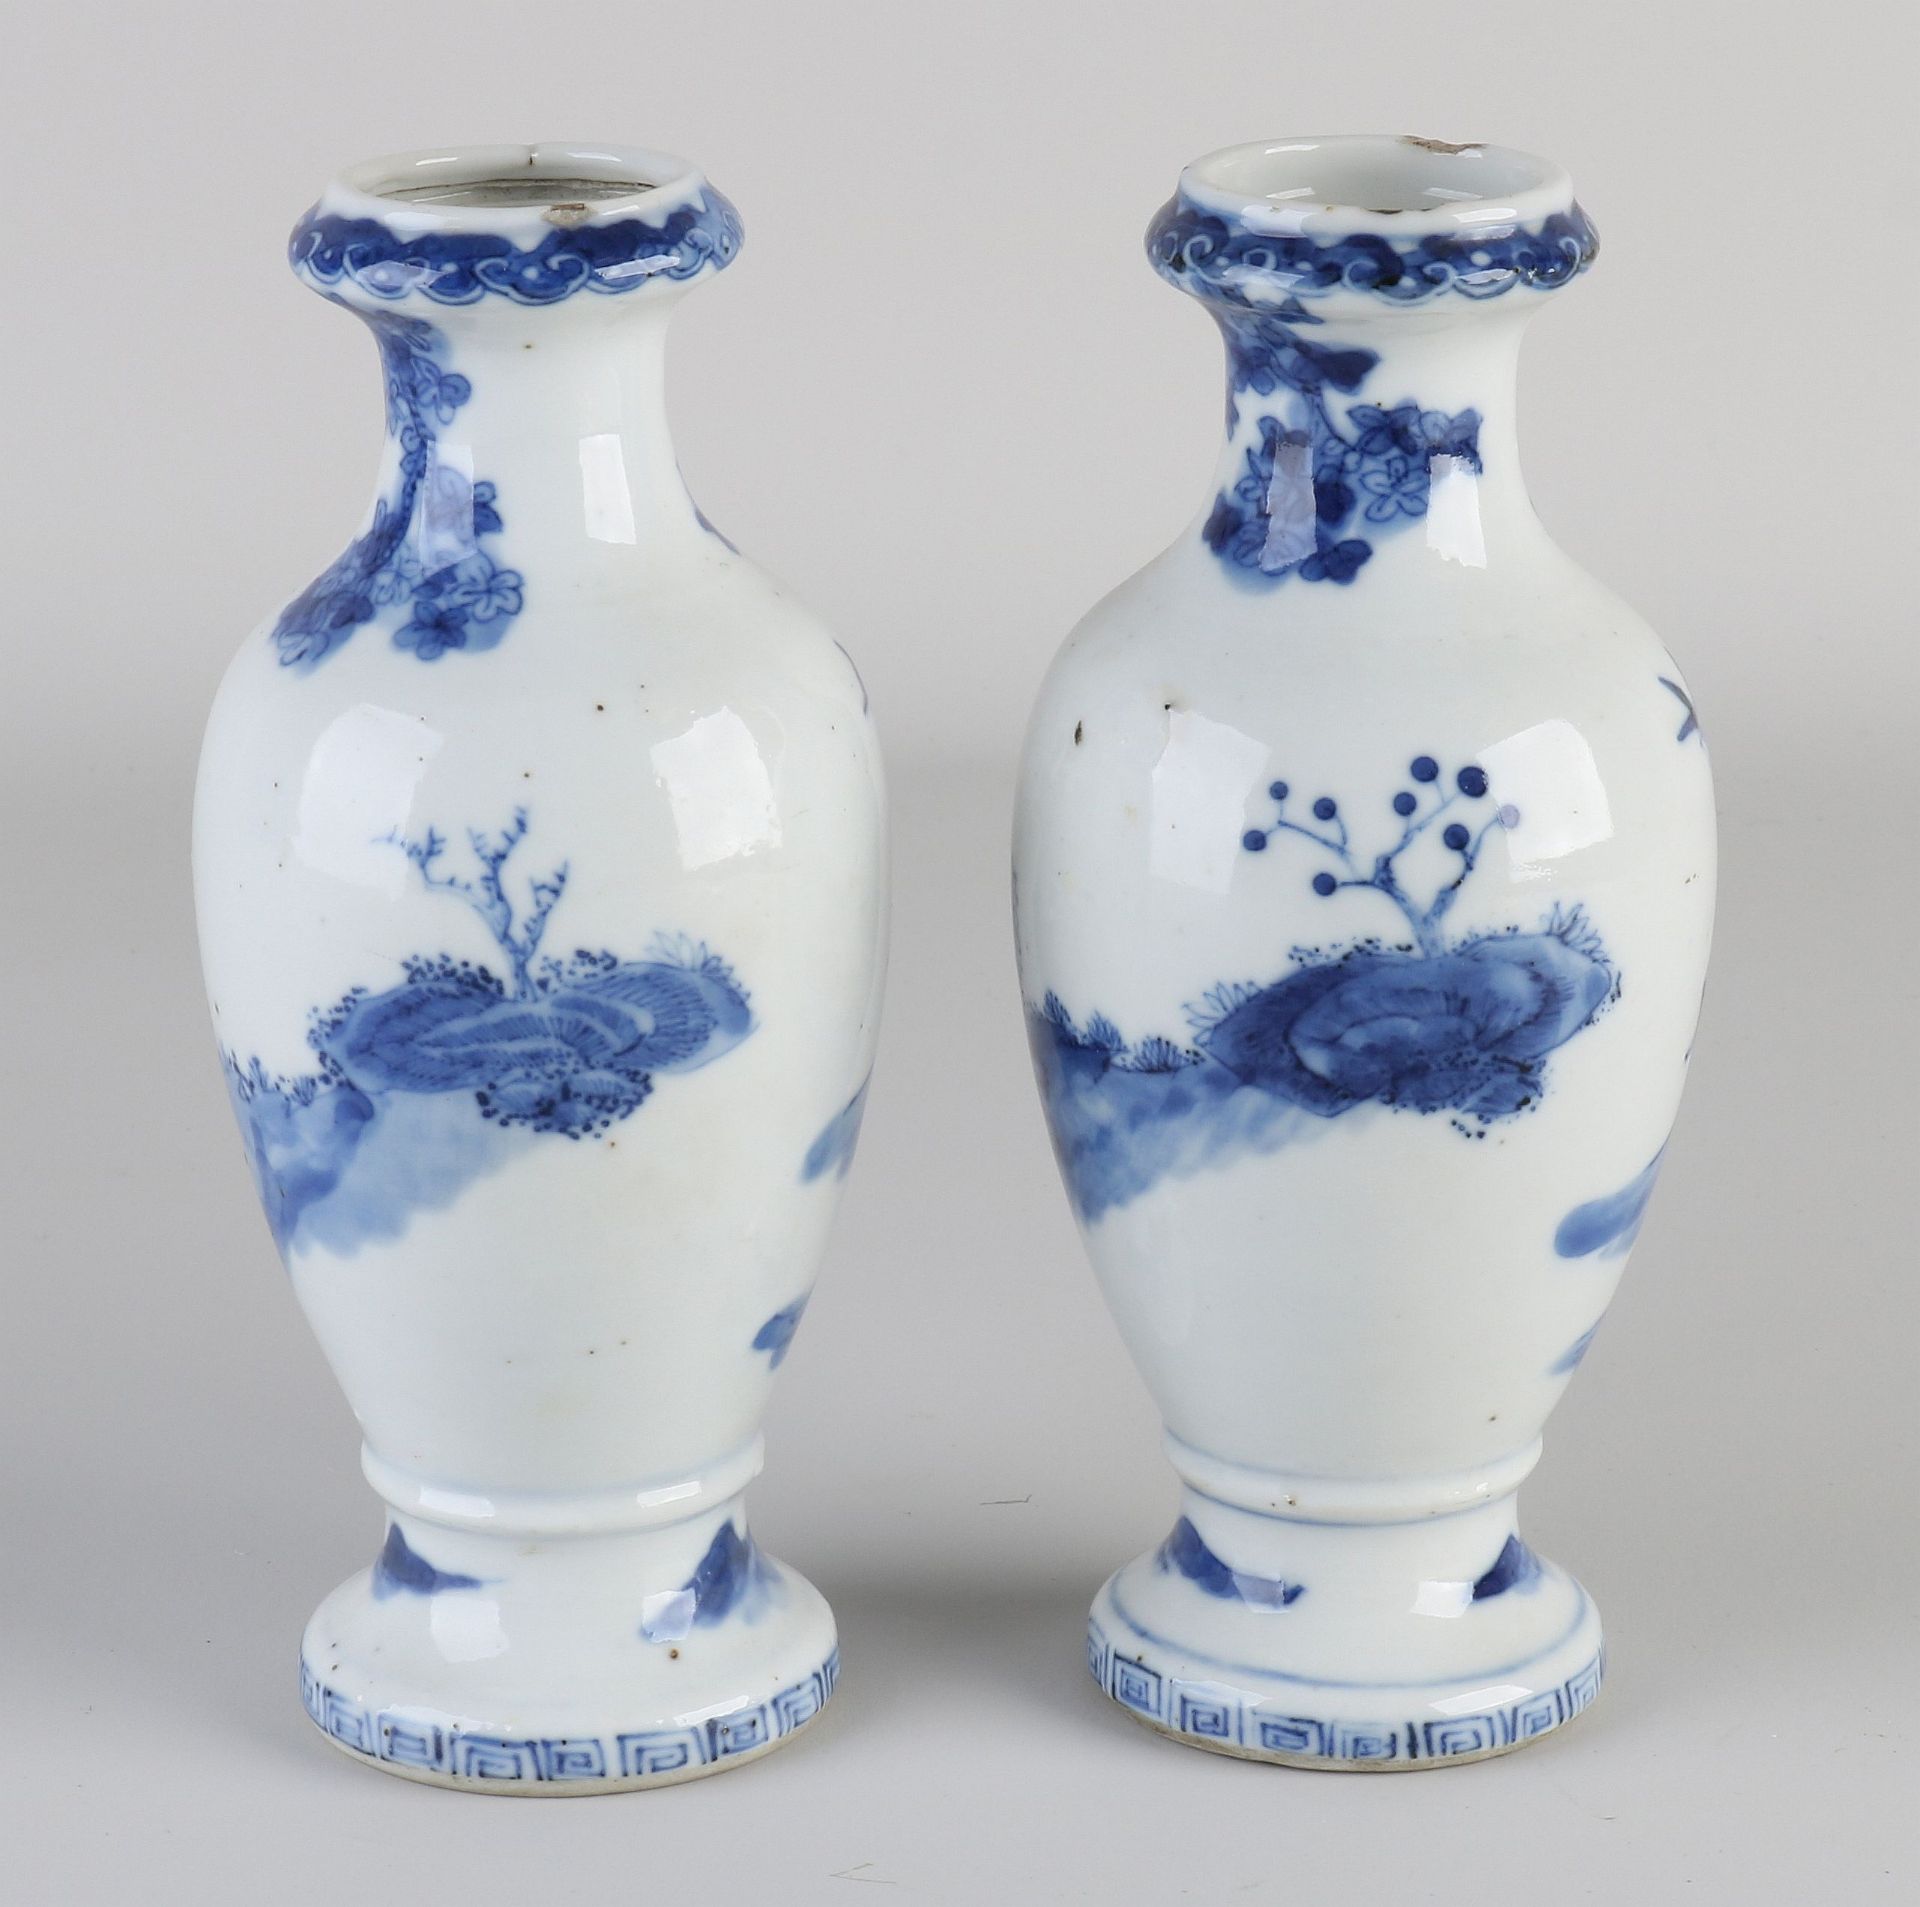 Two Chinese vases, H 16 cm. - Image 2 of 3